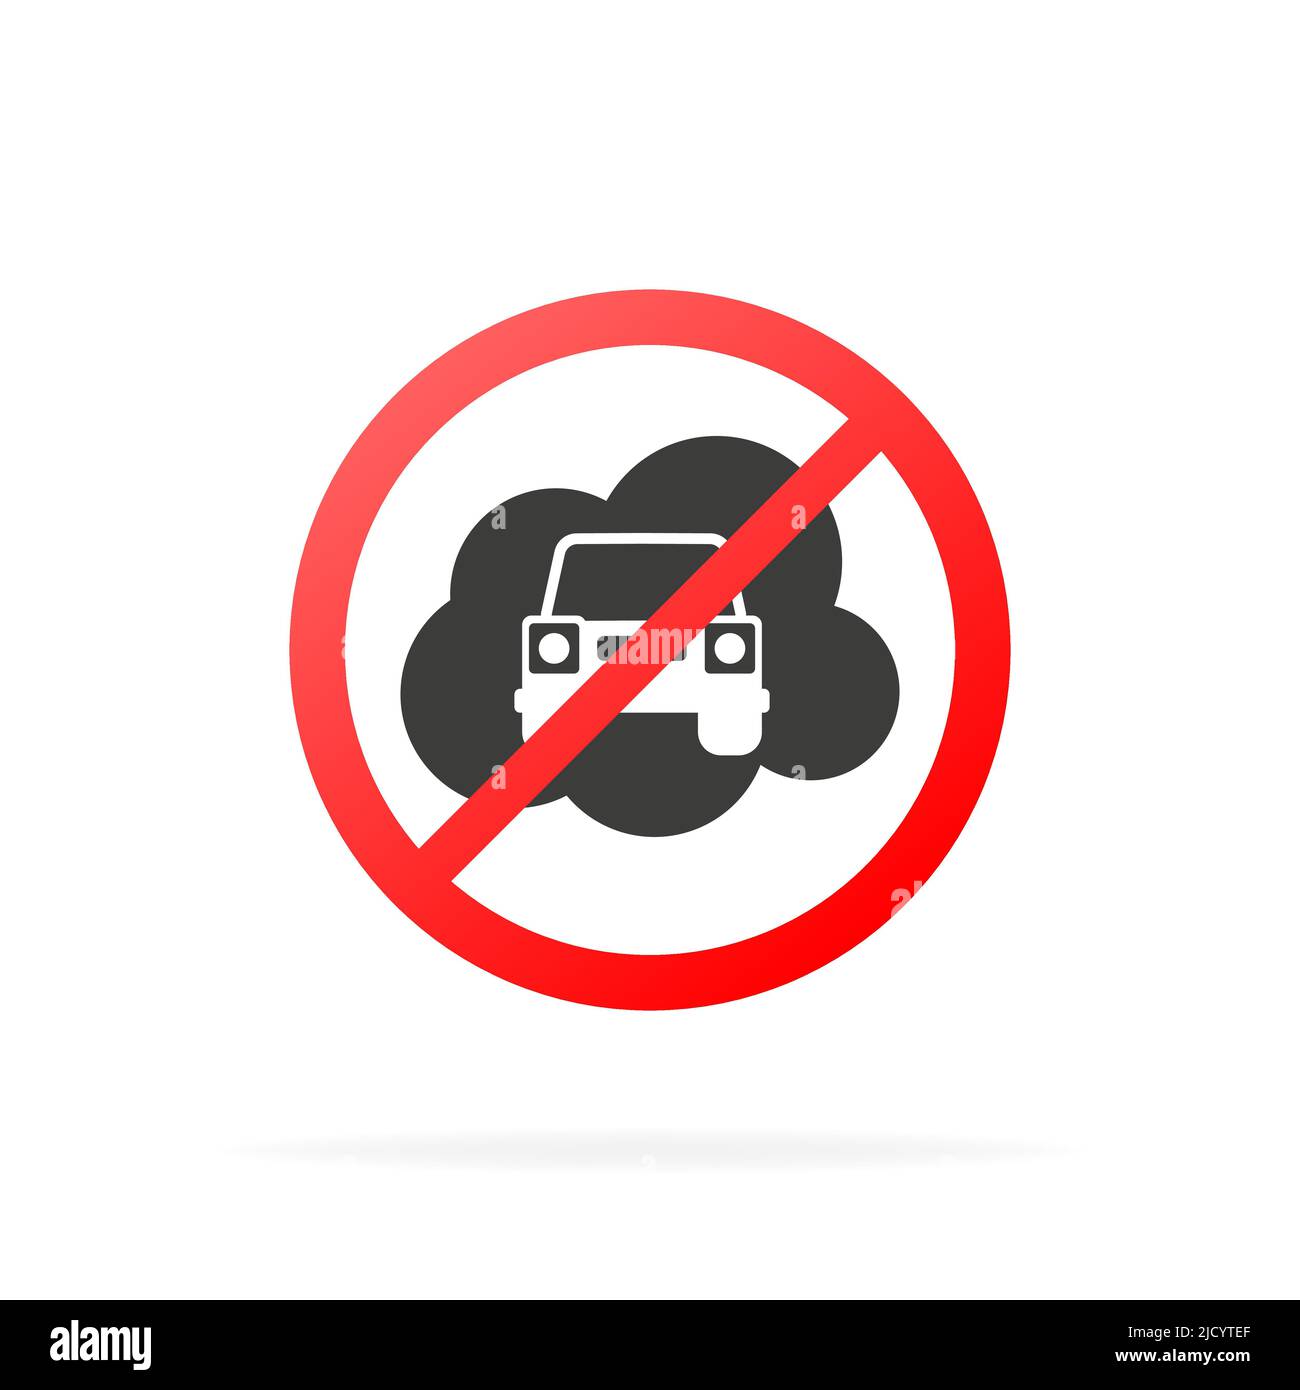 No co2 smog warning sign symbol isolated on a white background. Stock Vector